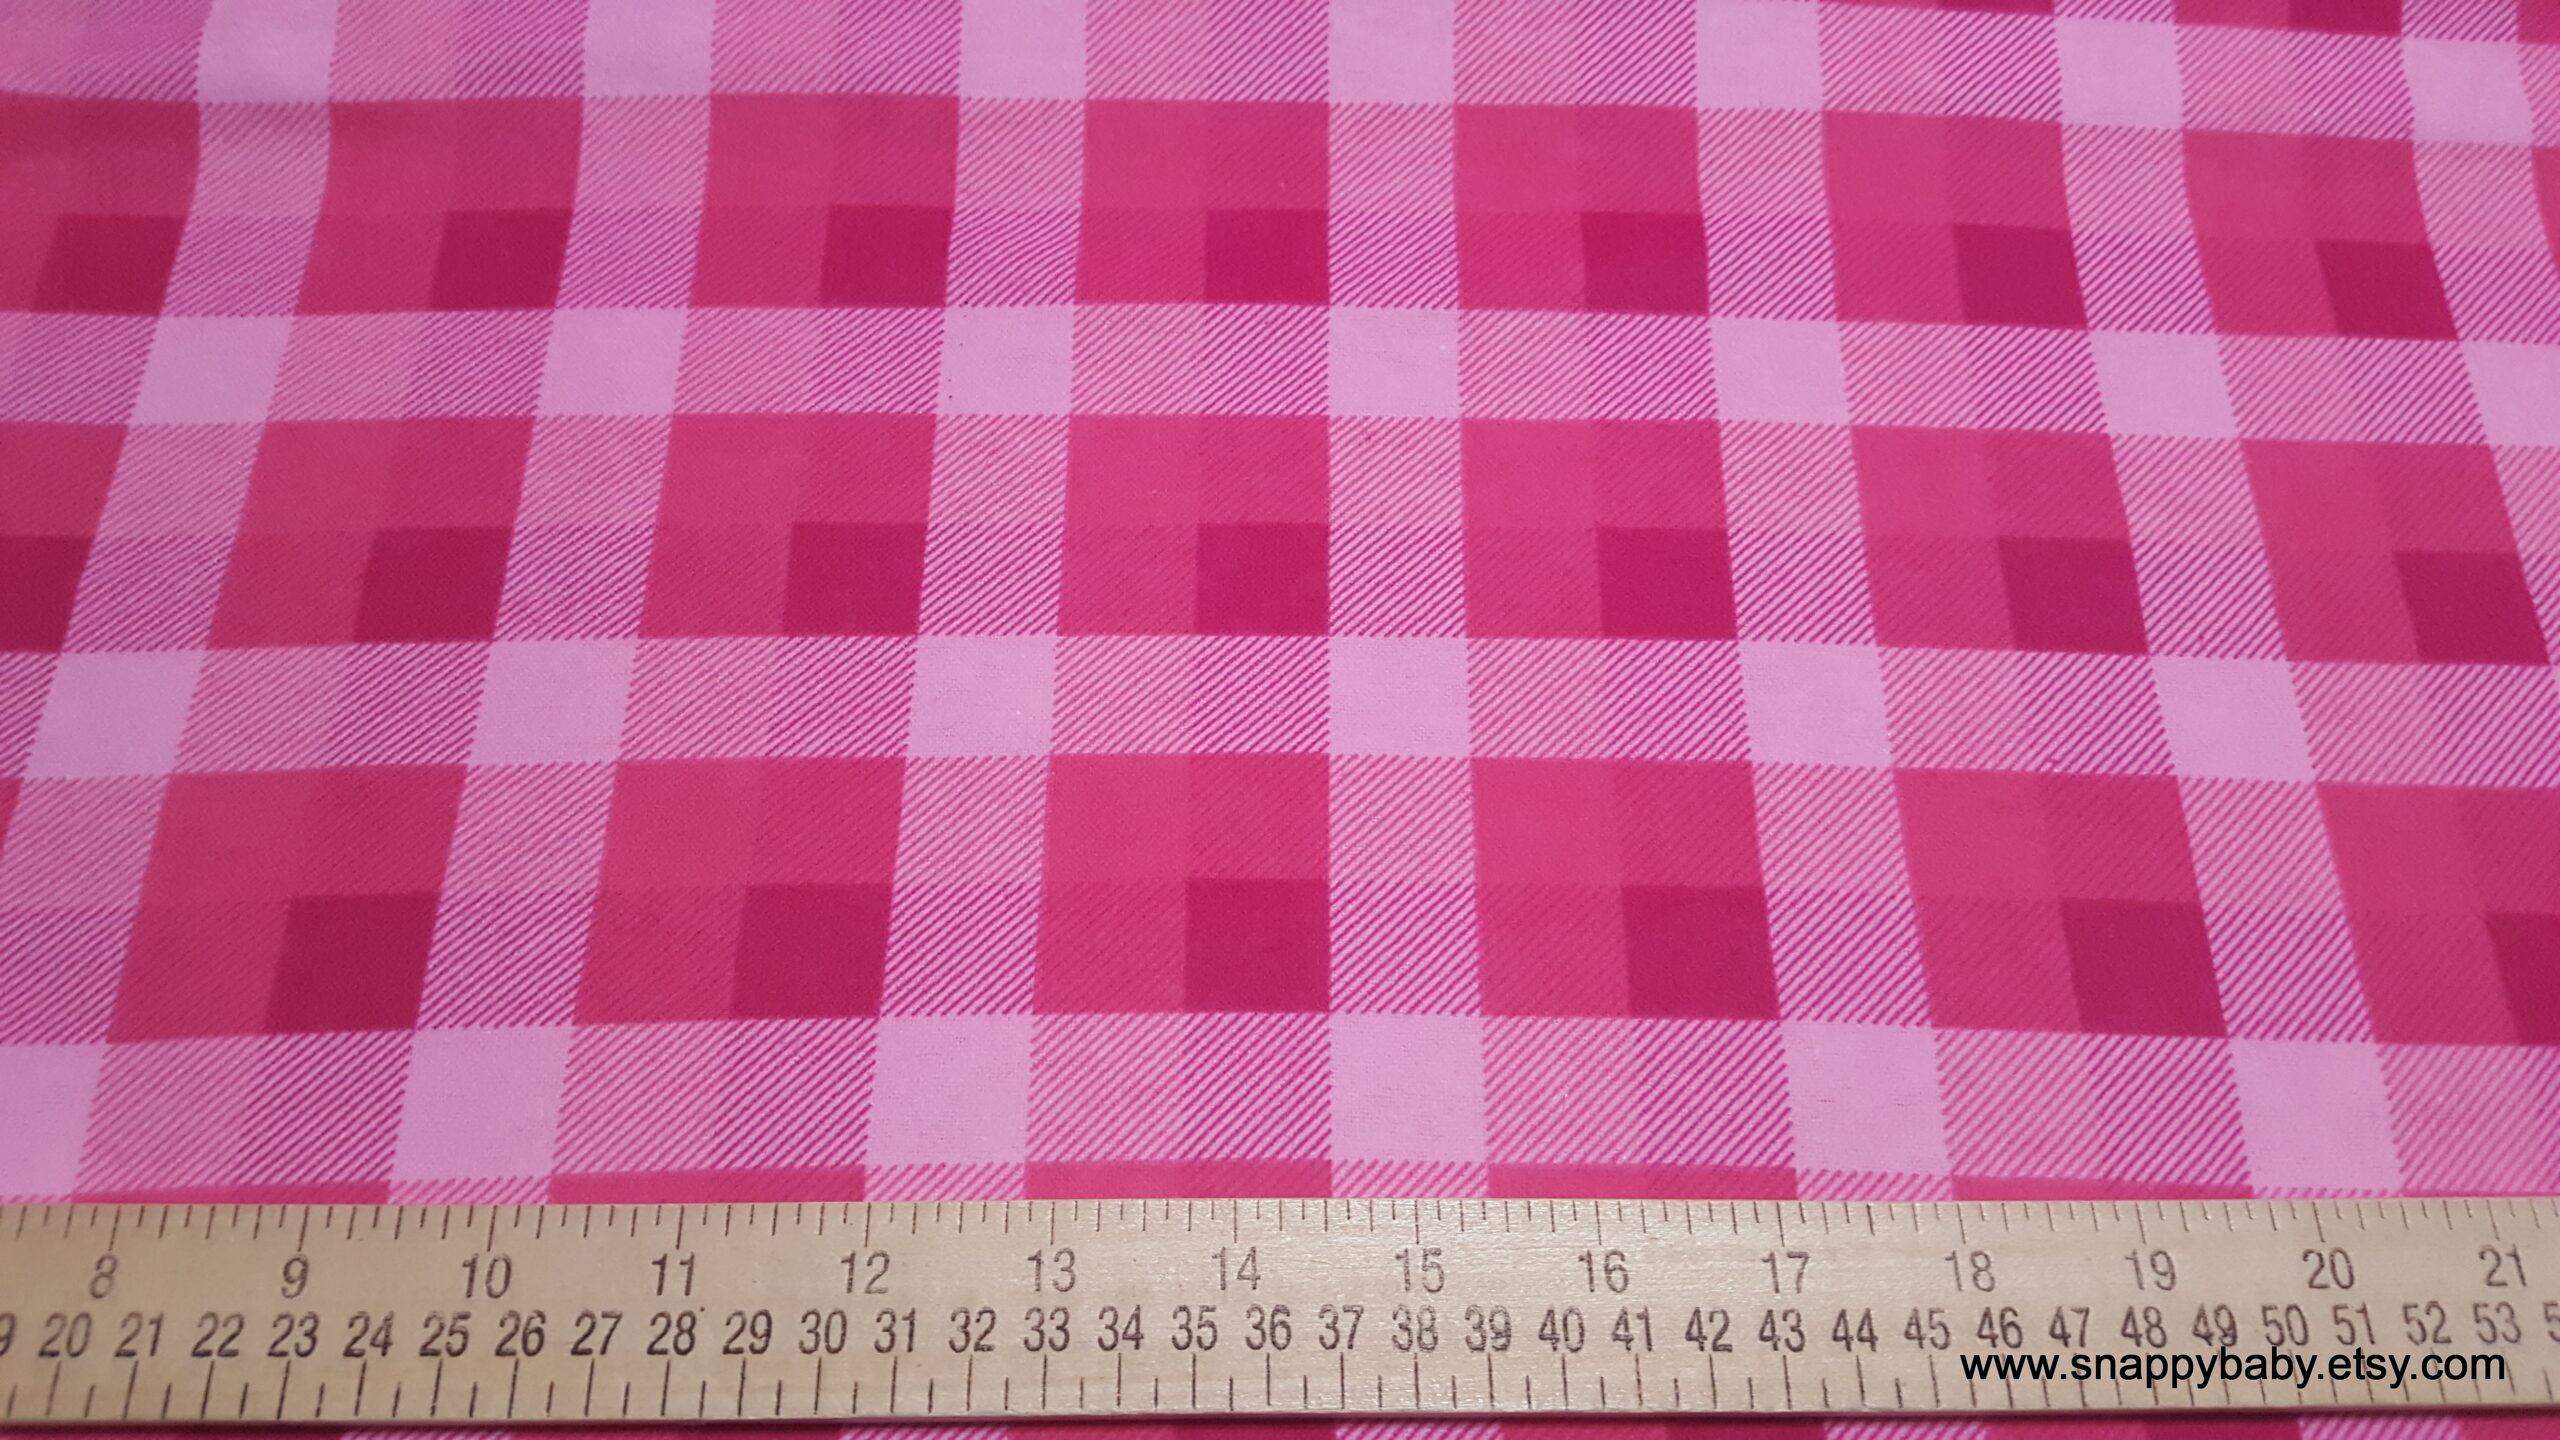 Flannel Fabric - Pink Tri Buffalo Check - By the yard - 100% Cotton ...